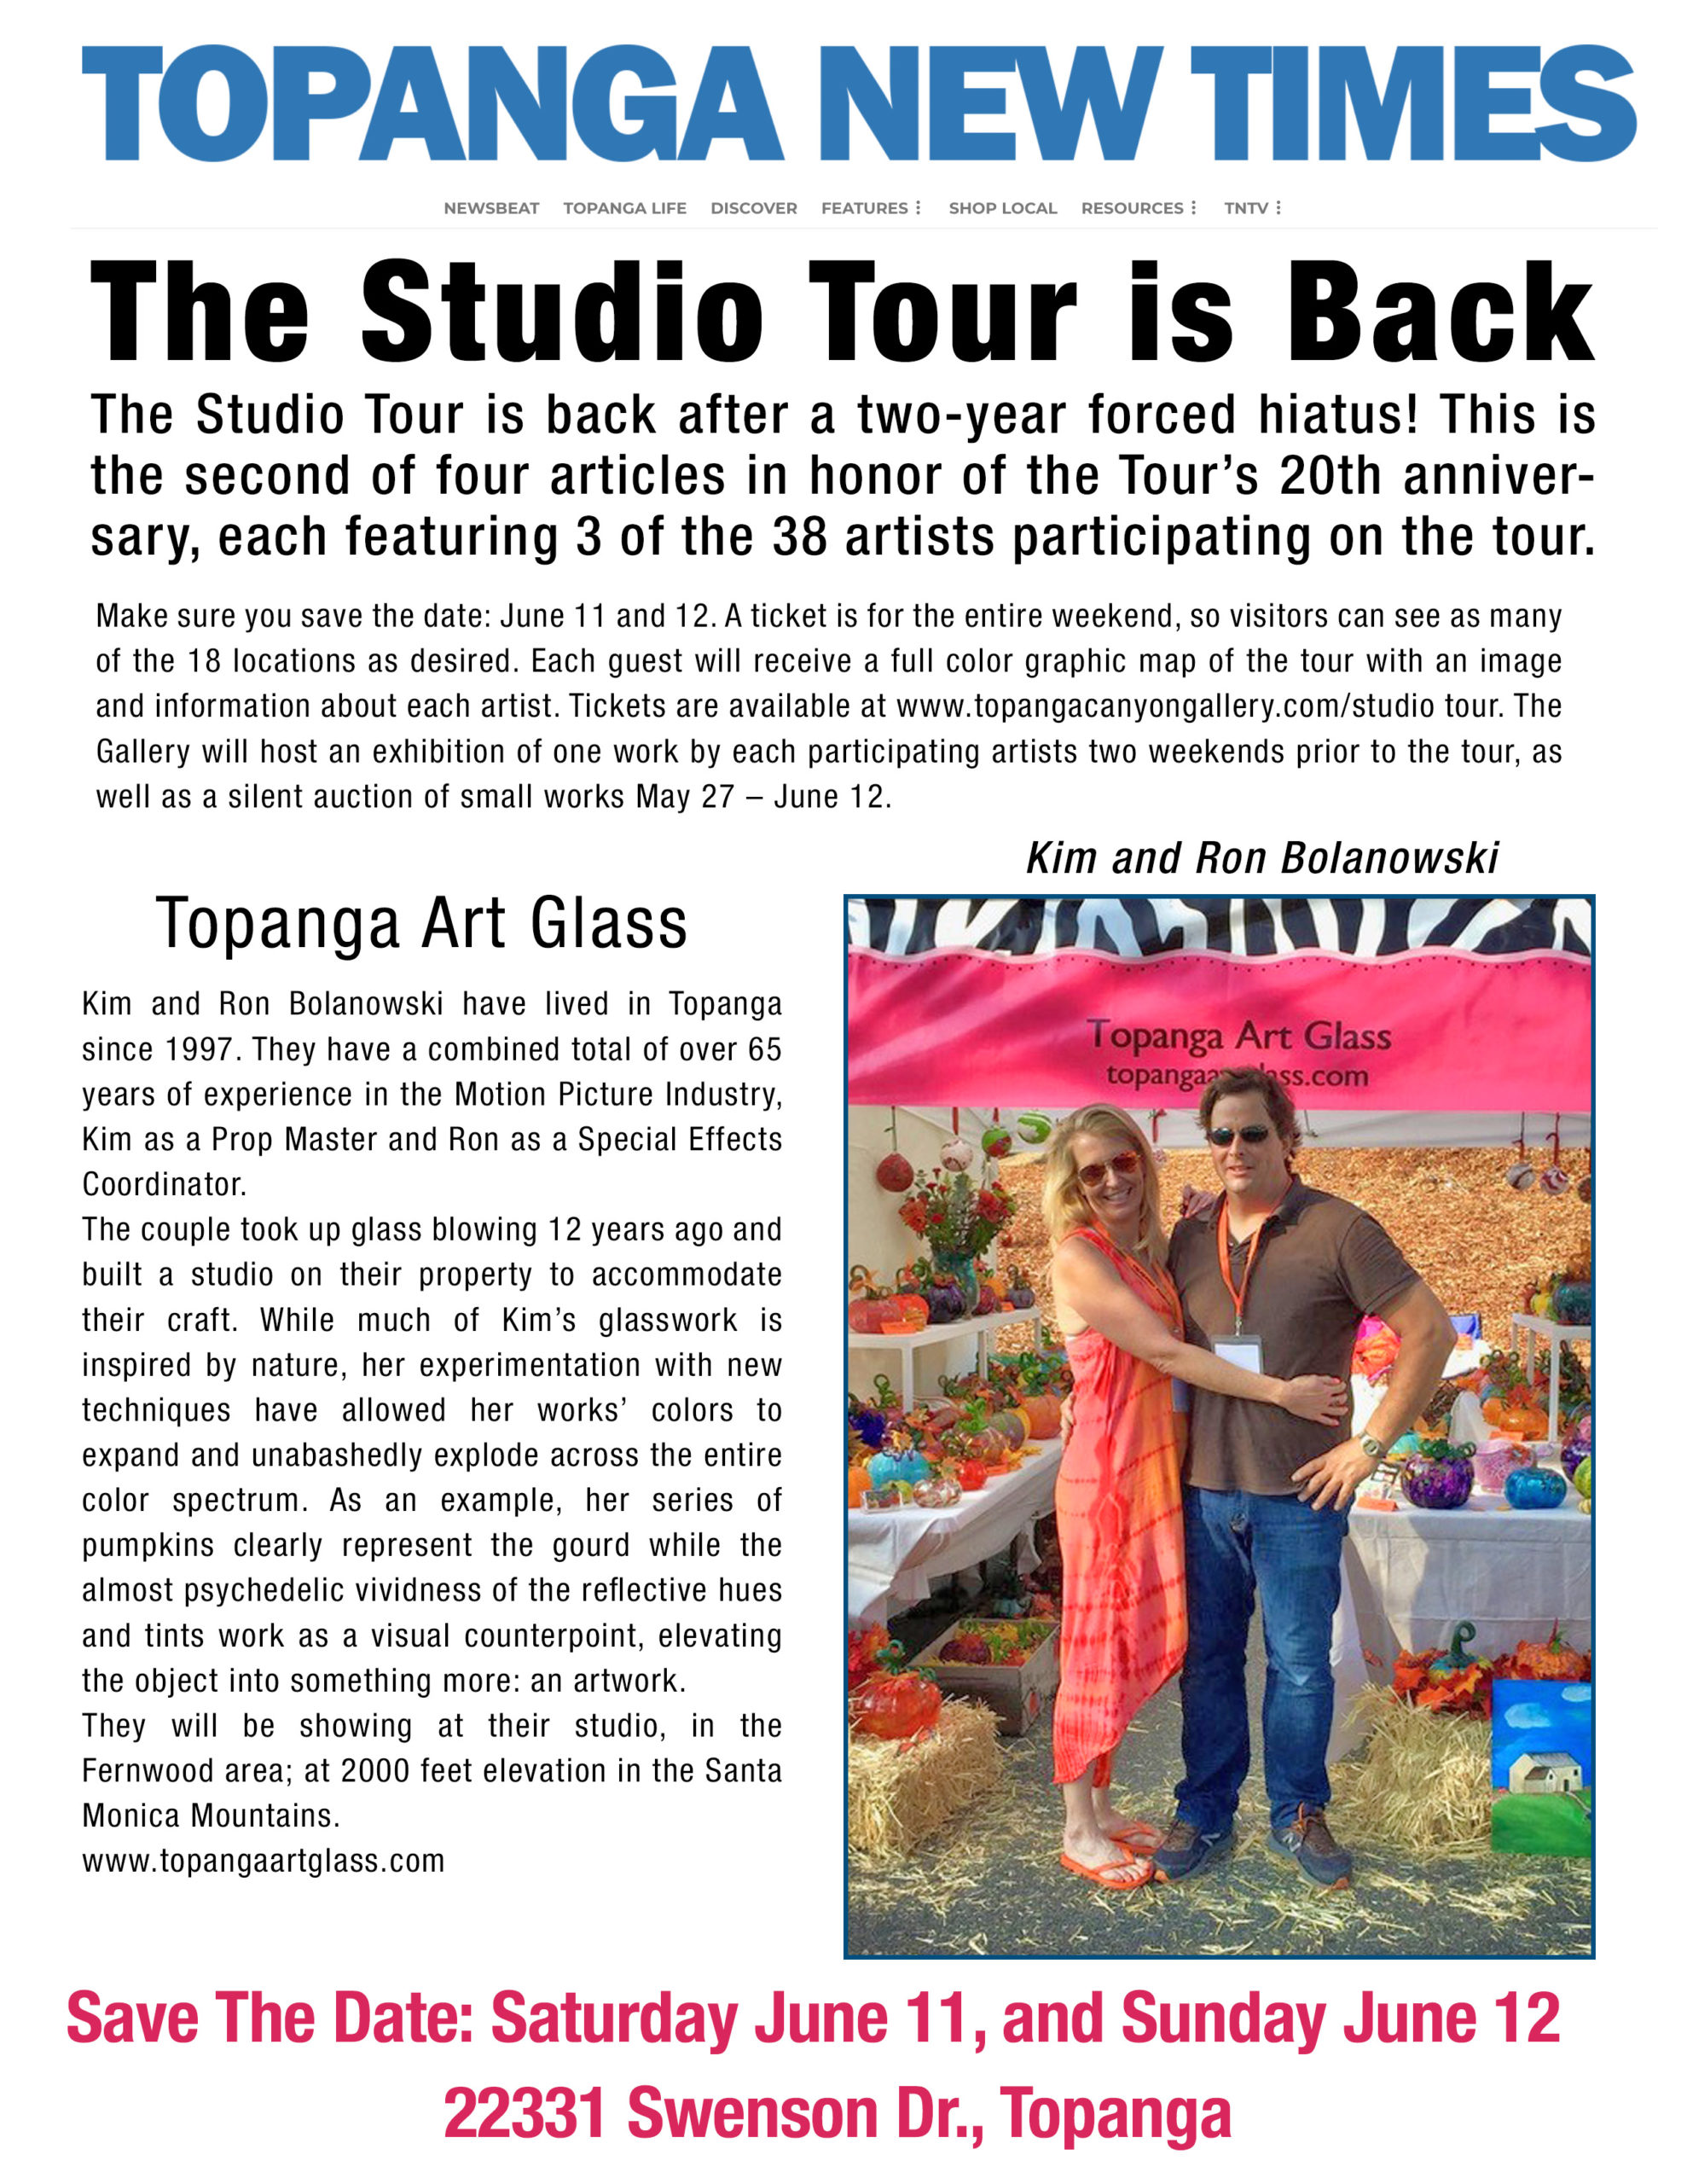 It’s time once again for the Topanga Studio Tour 2022!